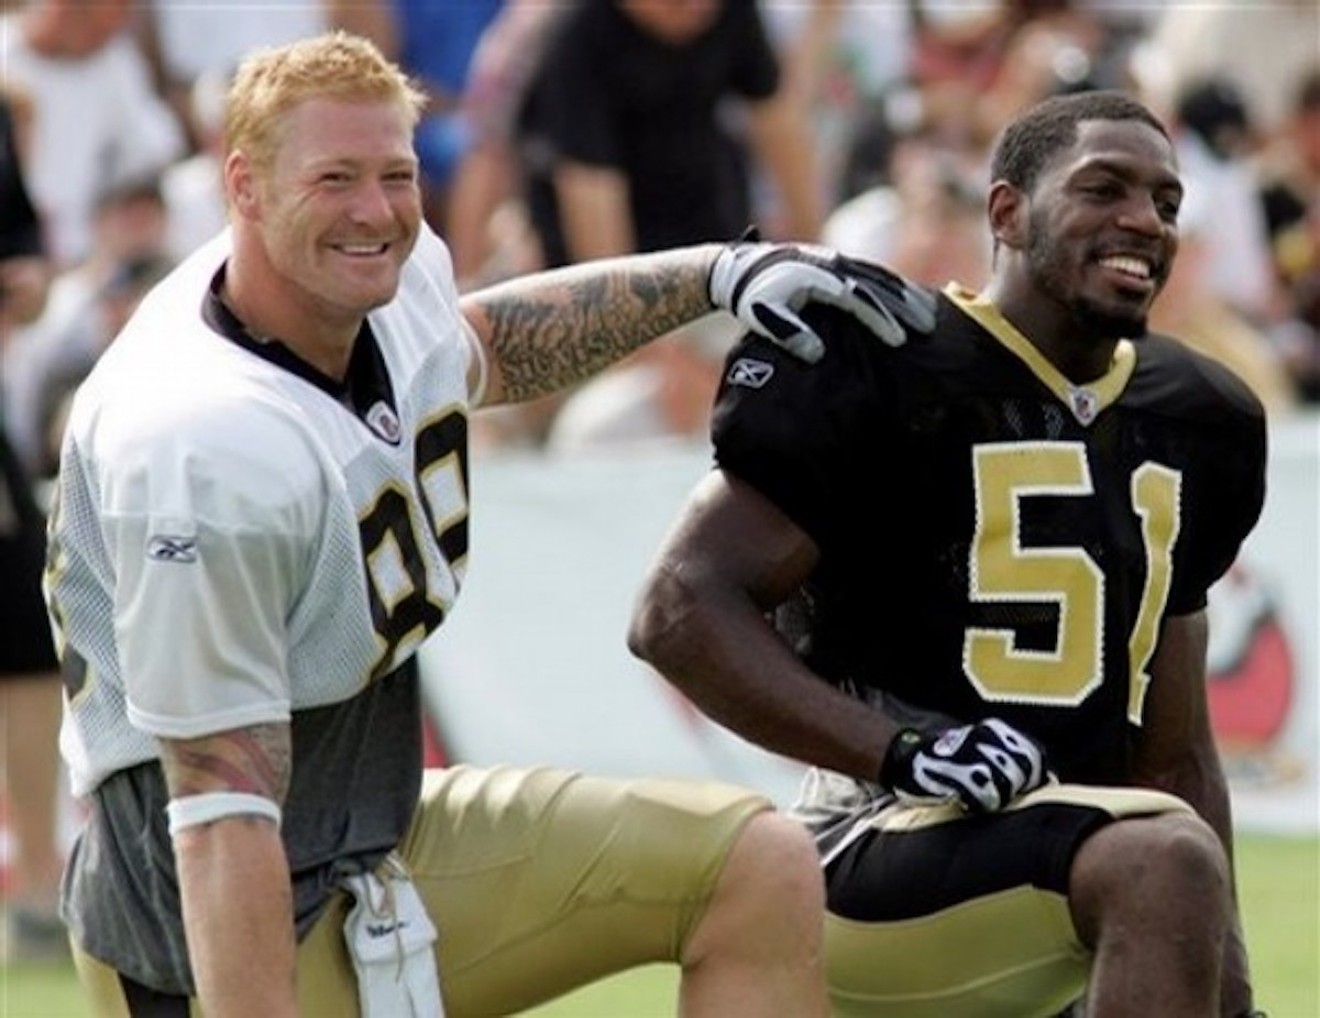 UM greats Jonathan Vilma (right) and Jeremy Shockey during their days playing for the Saints.